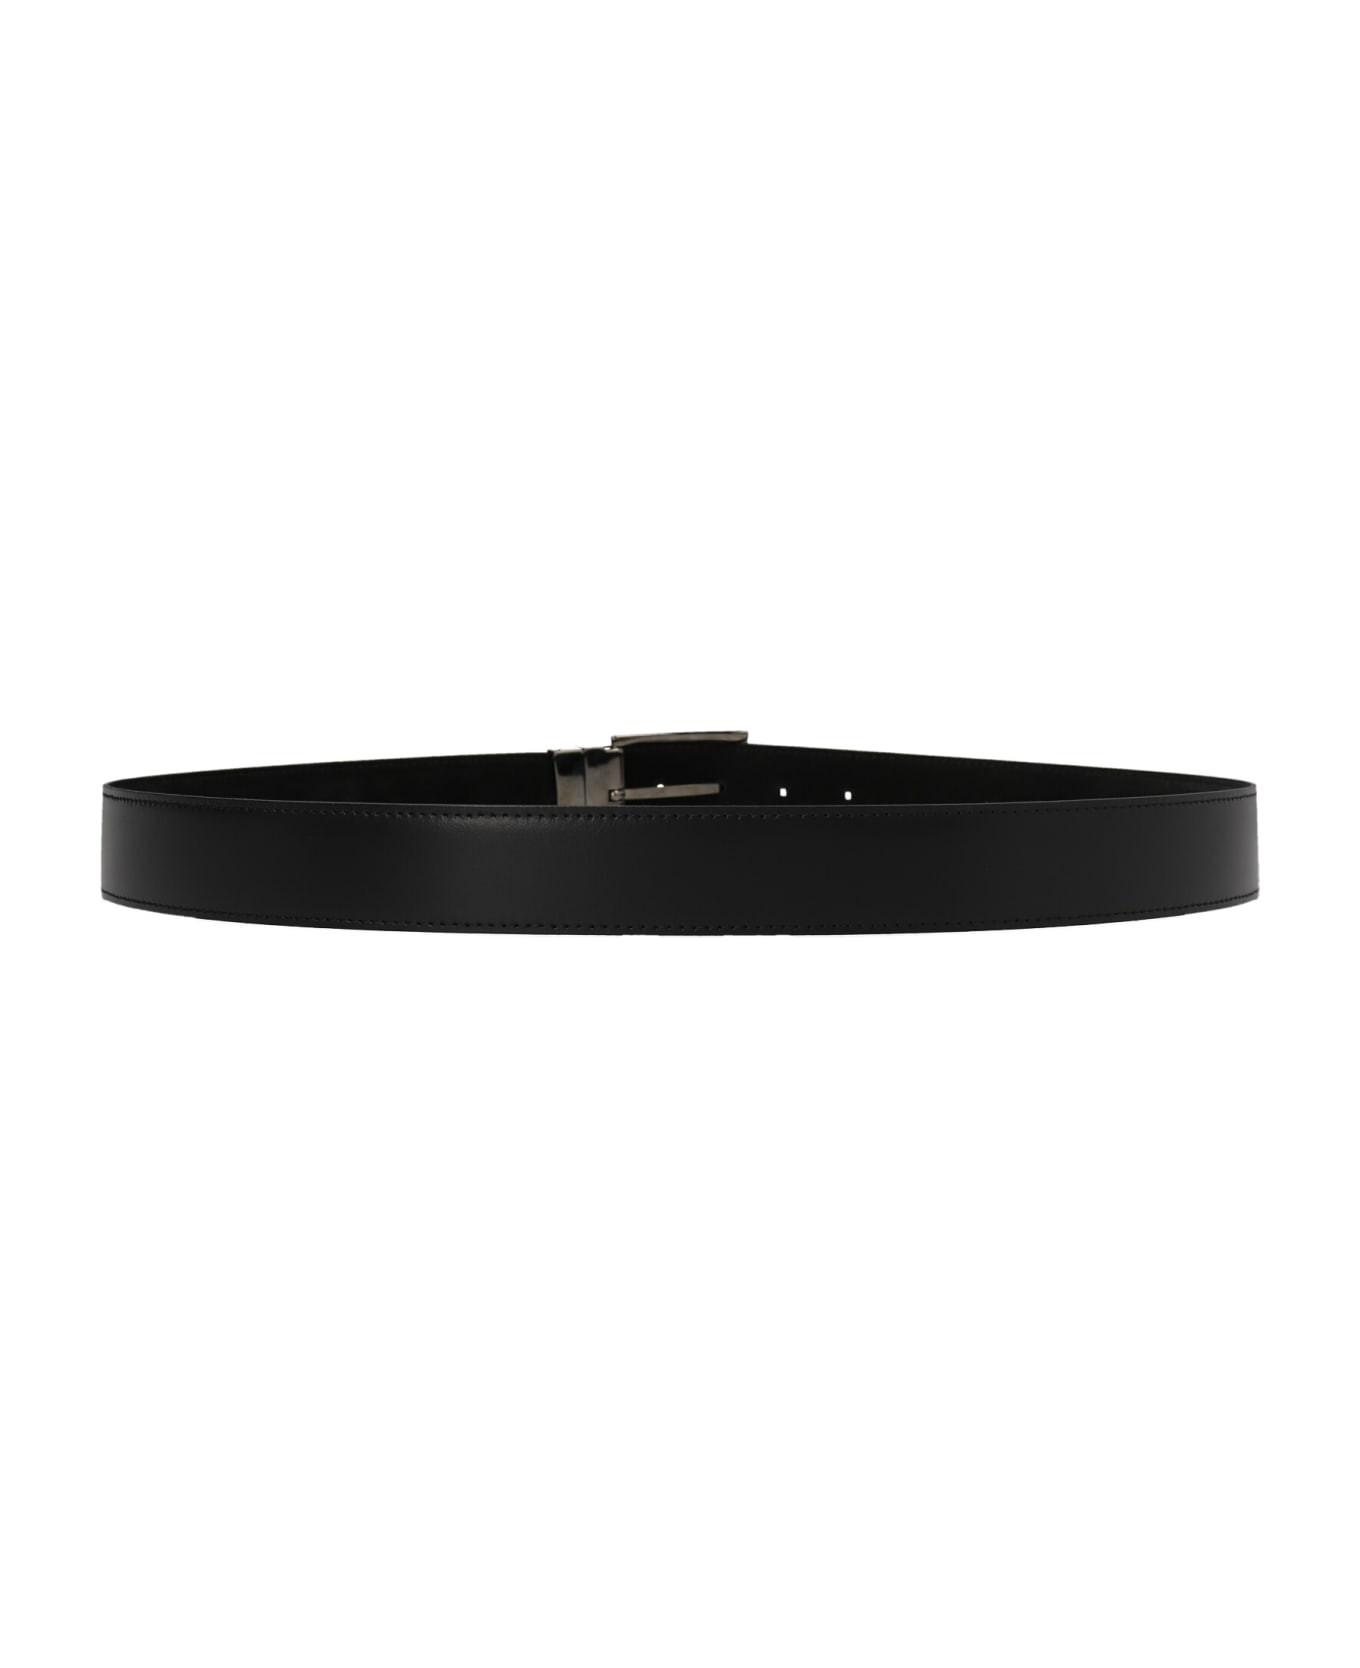 D'Amico Reversible Suede Leather Belt - Black  